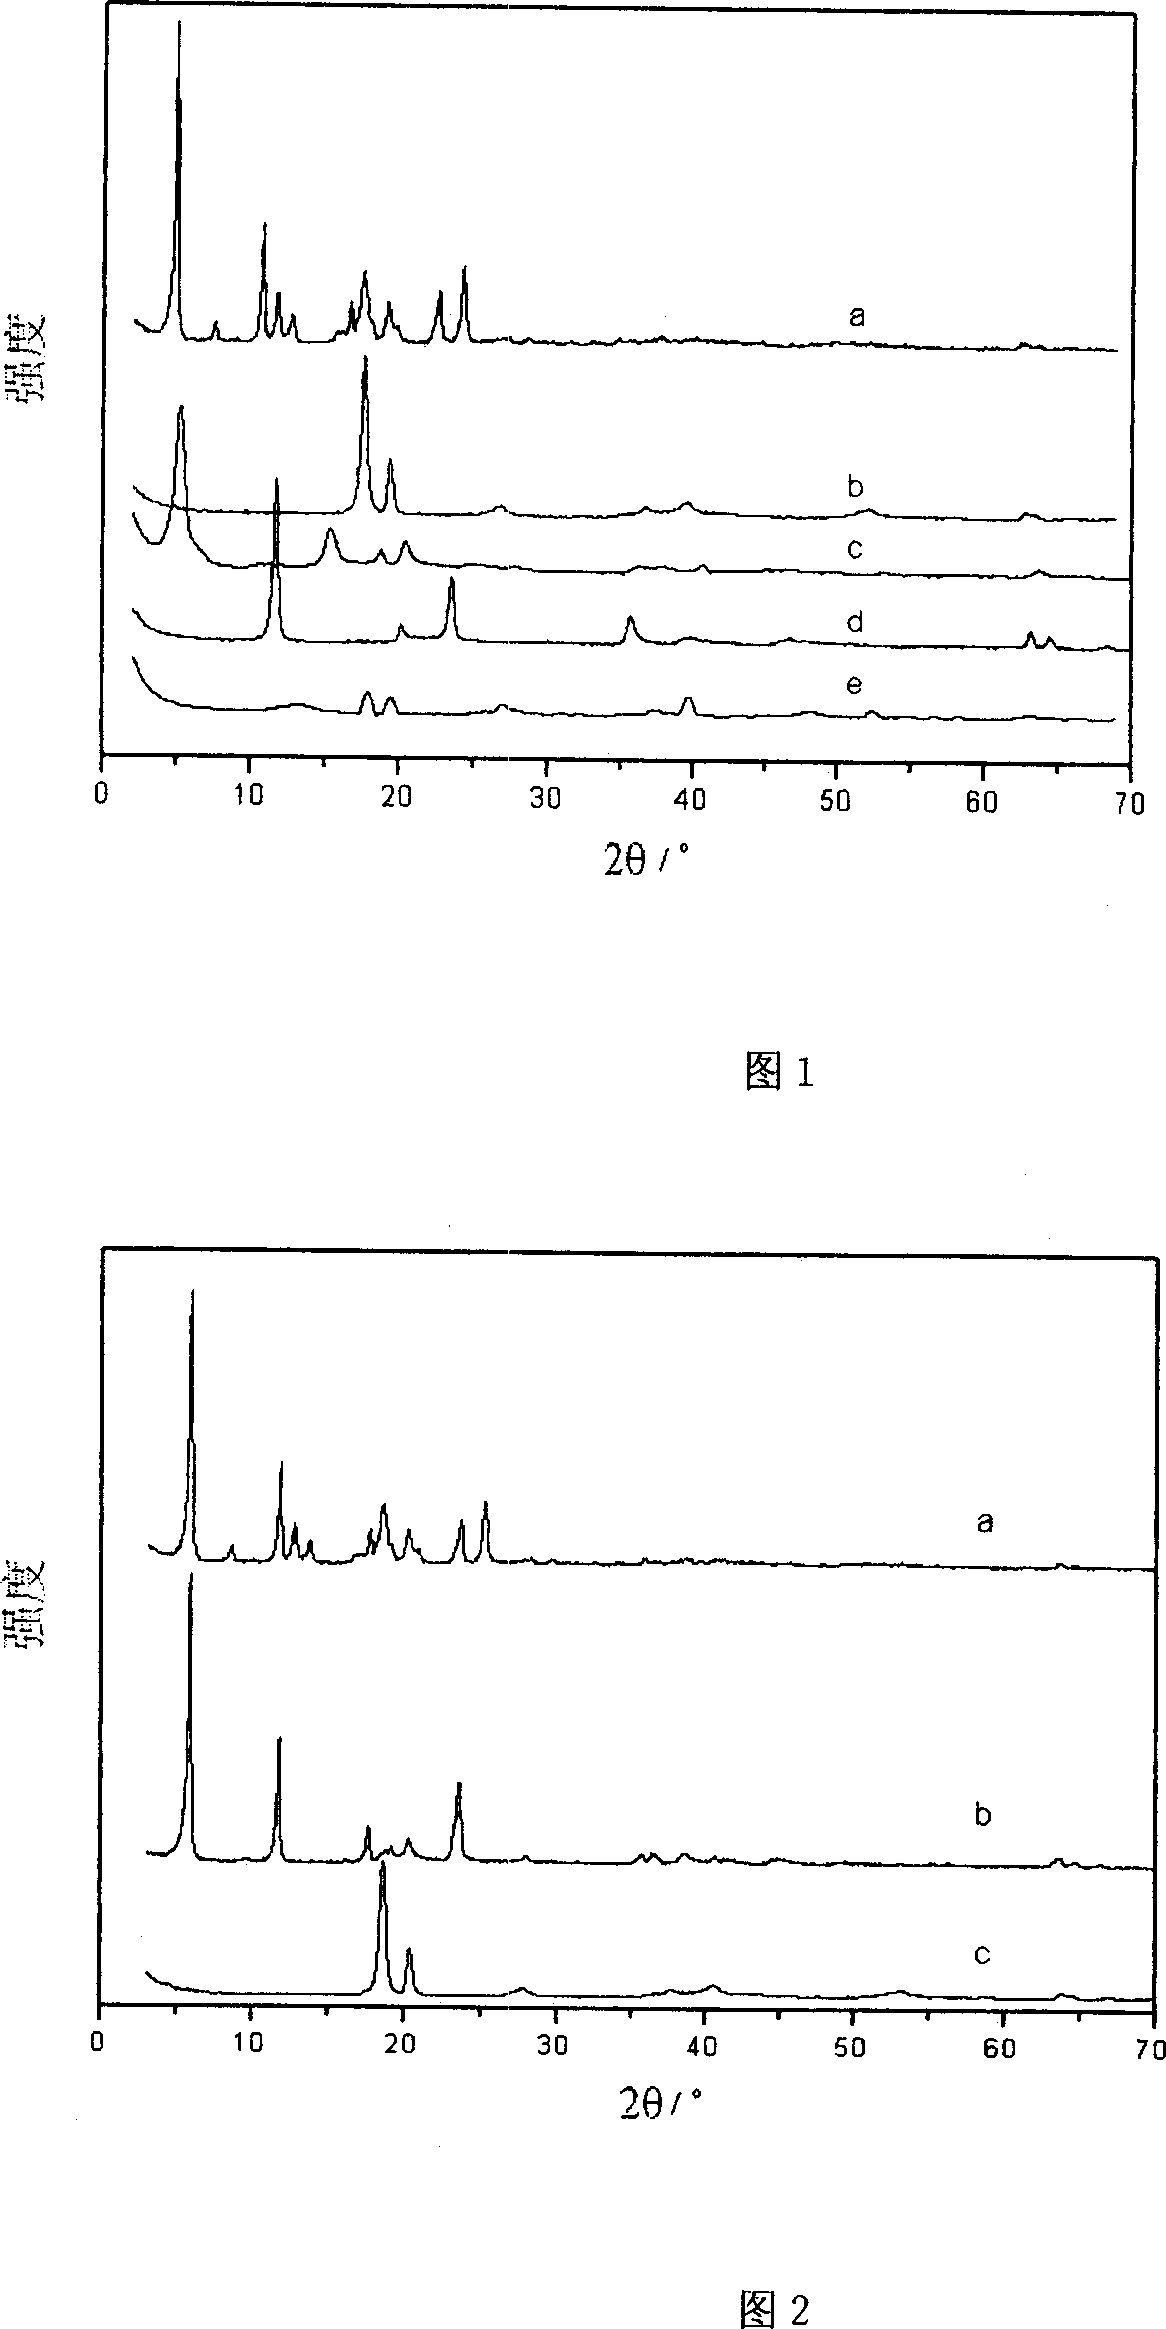 Decomposing process for salicylic acid and its isomer using hydrotalcite